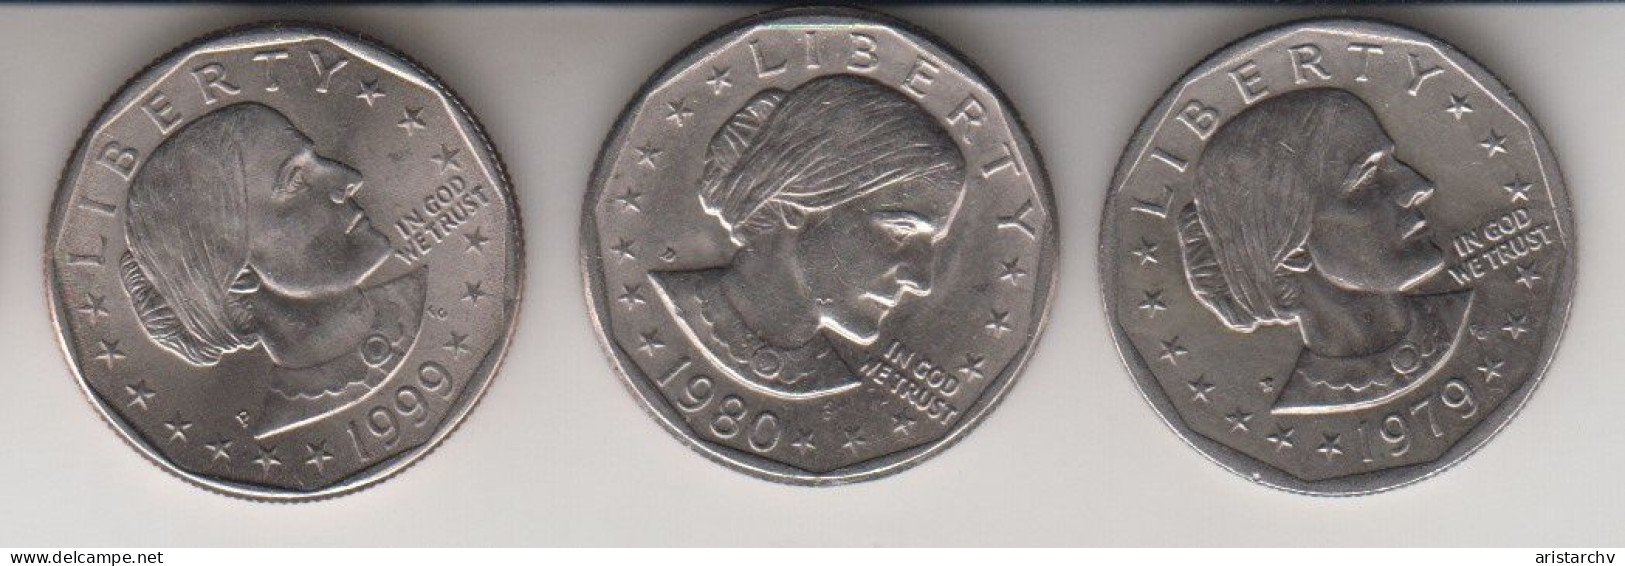 USA 1979 1980 1999 1 $ DOLLAR ANTHONY EAGLE 3 CIRCULATED COINS - 1979-1999: Anthony